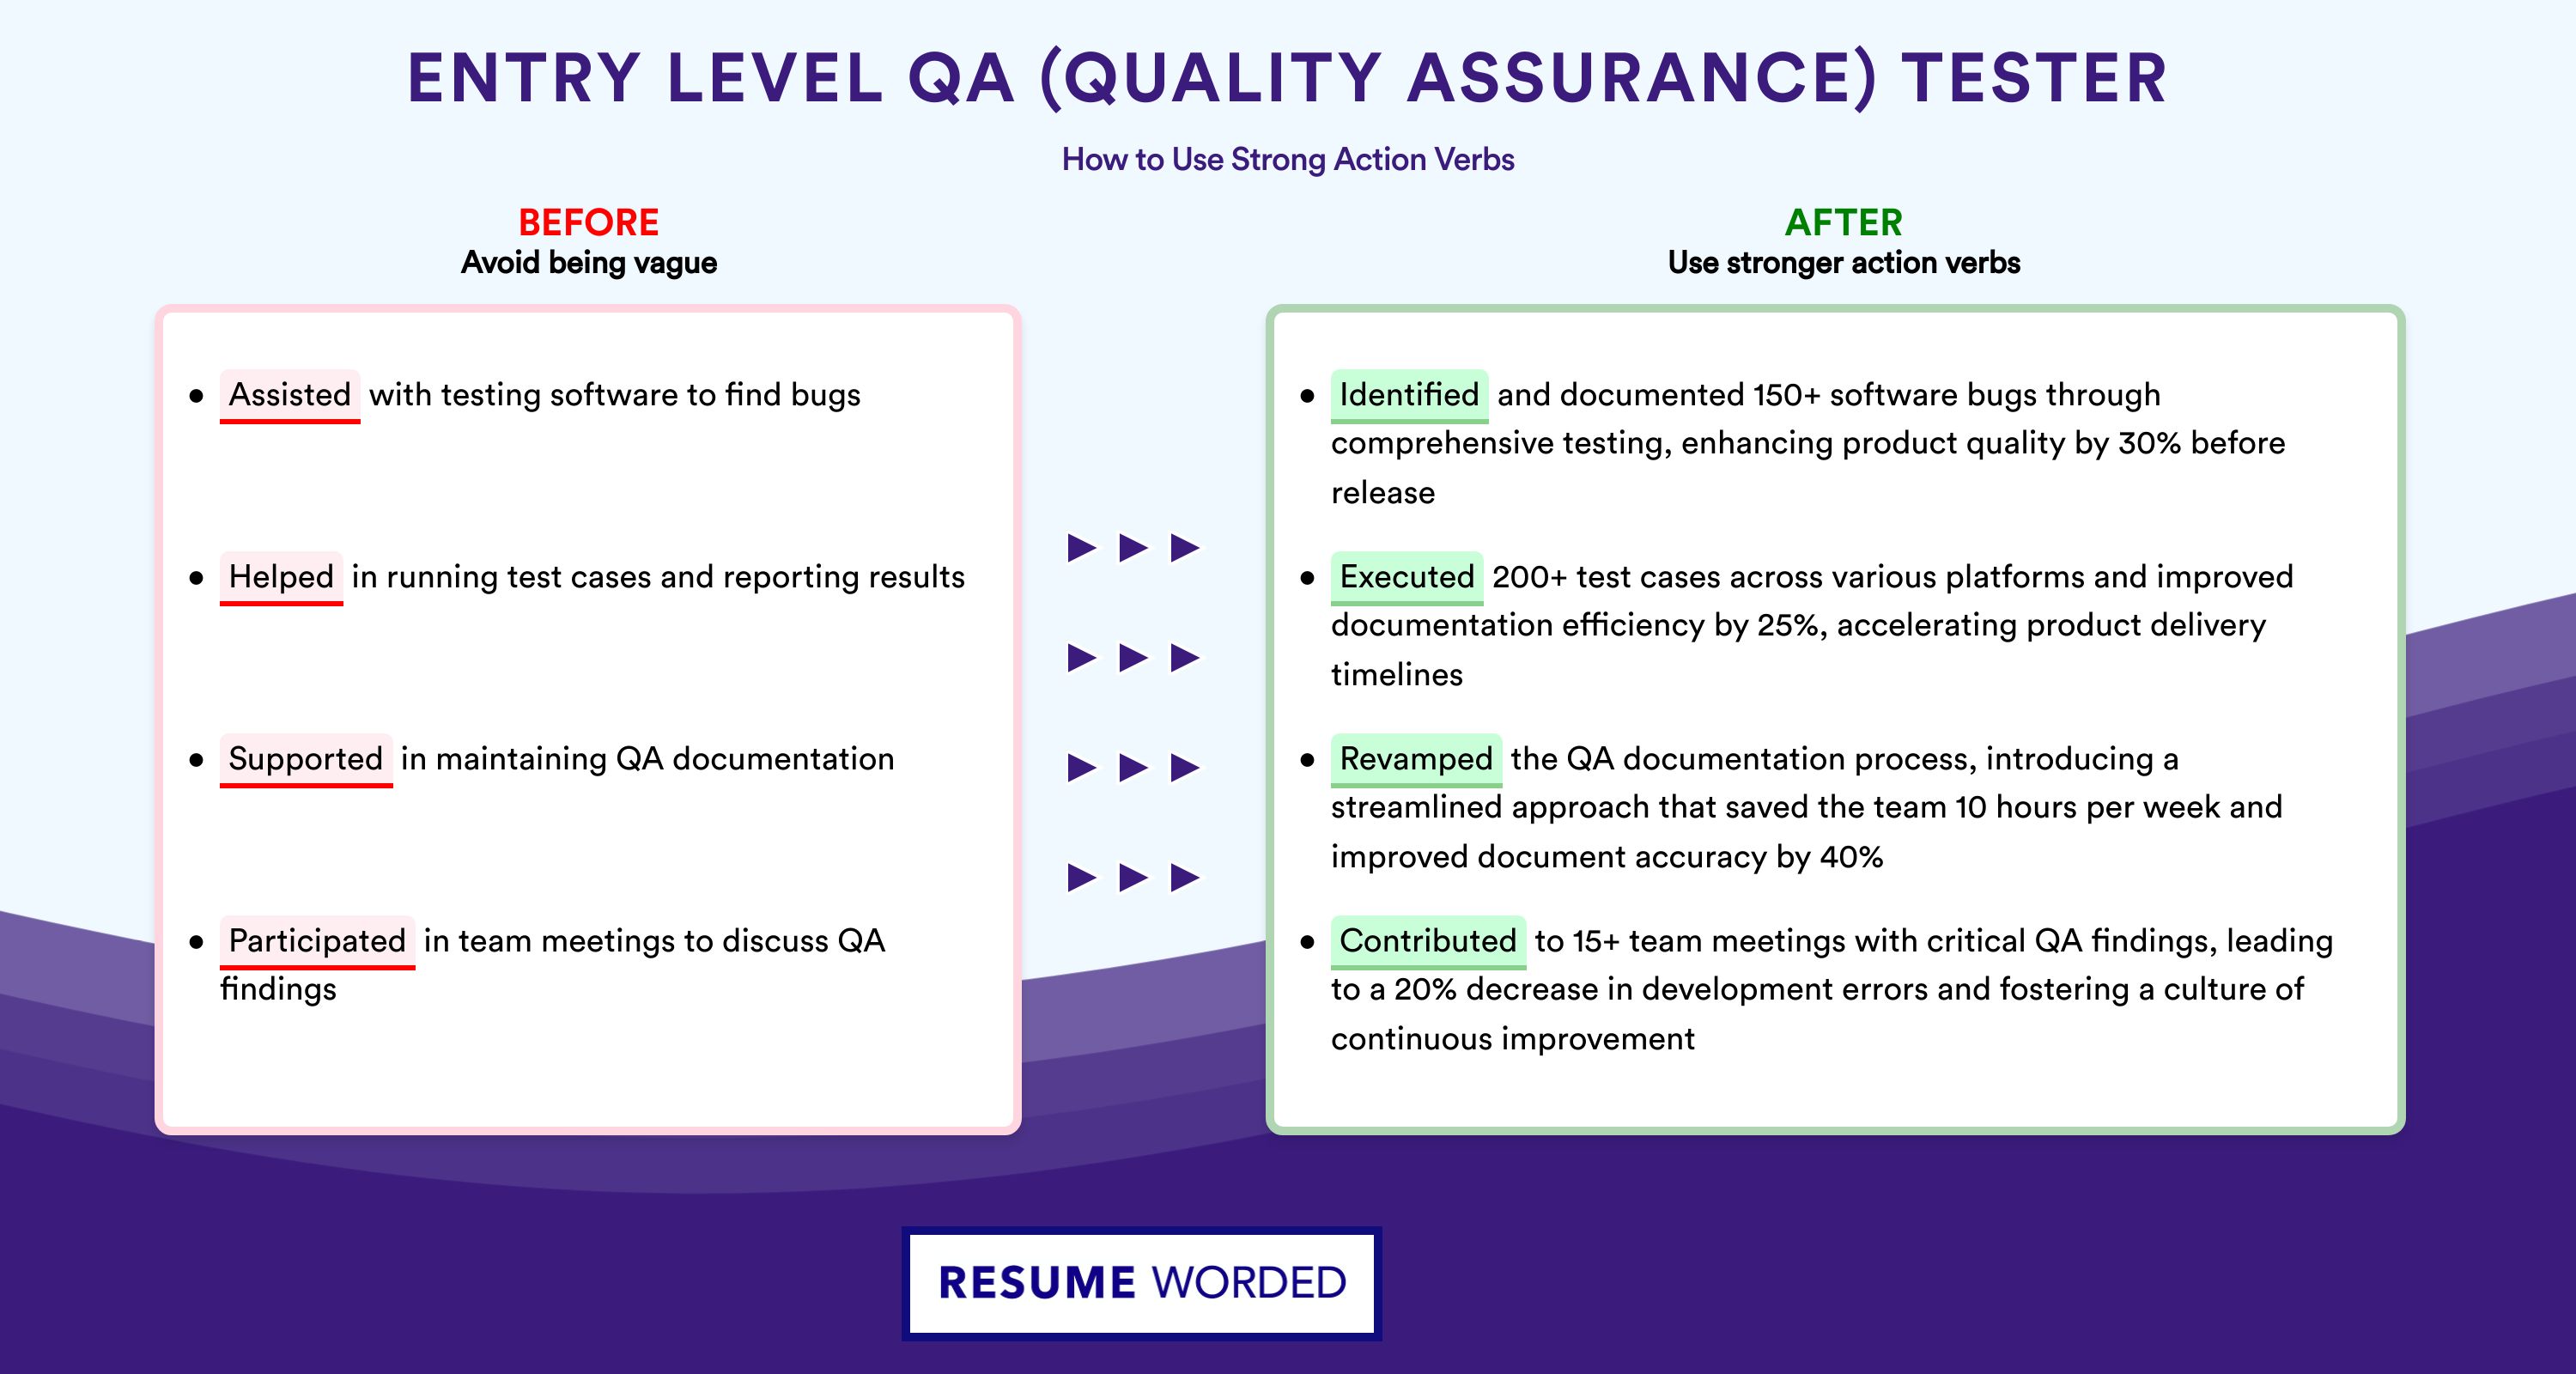 Action Verbs for Entry Level QA (Quality Assurance) Tester